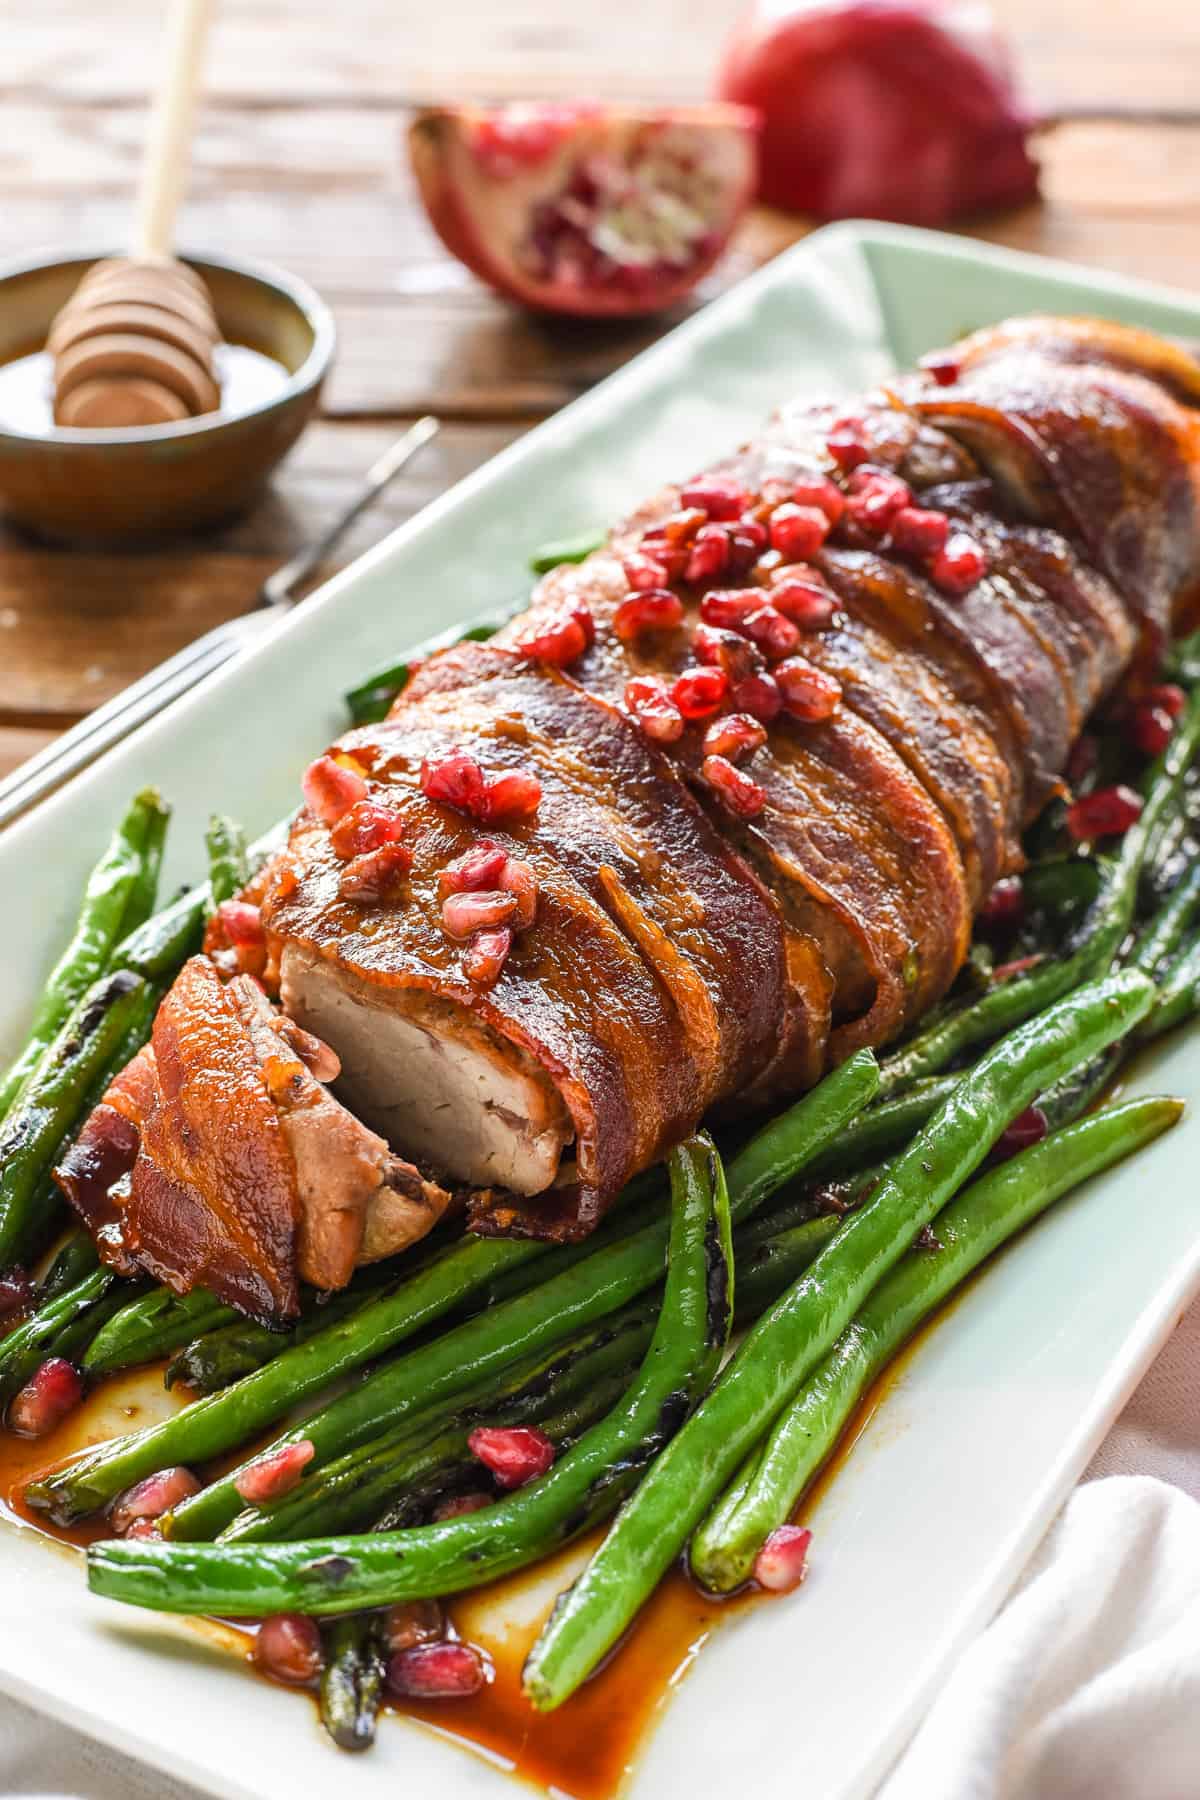 This Bacon Wrapped Pork Tenderloin is an EASY dish that comes together in under an hour!